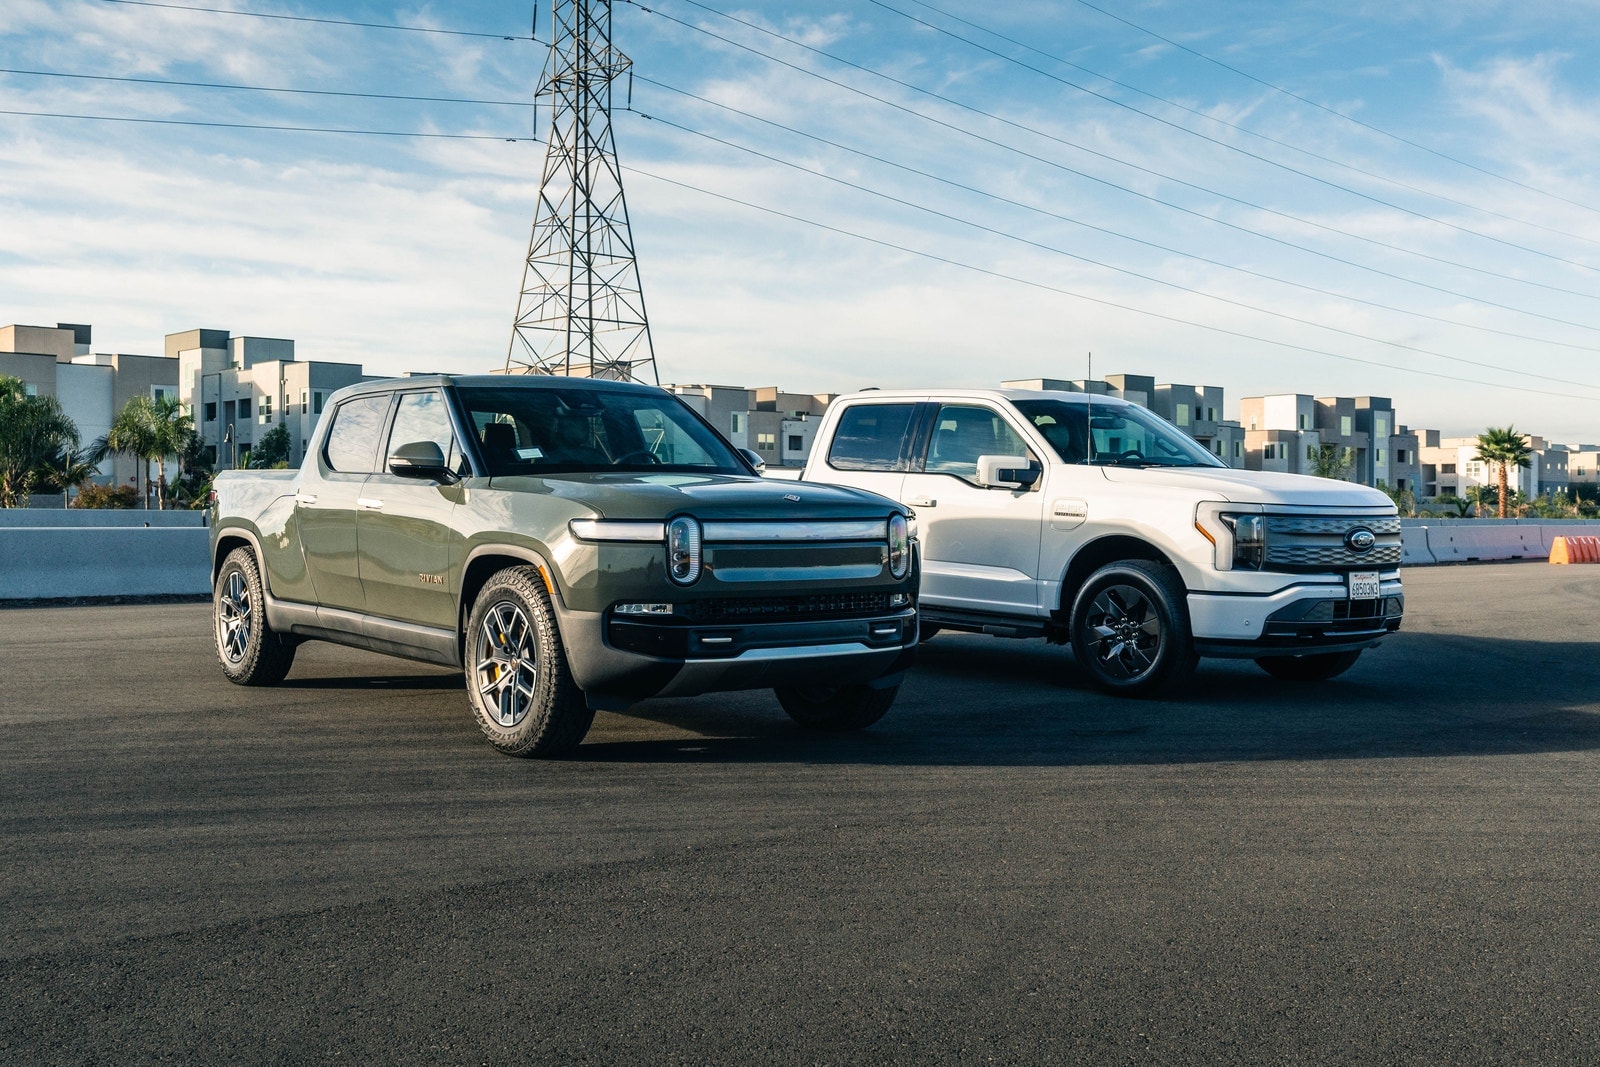 Edmunds Top Rated Electric Truck finalists: Rivian R1T and Ford F-150 Lightning